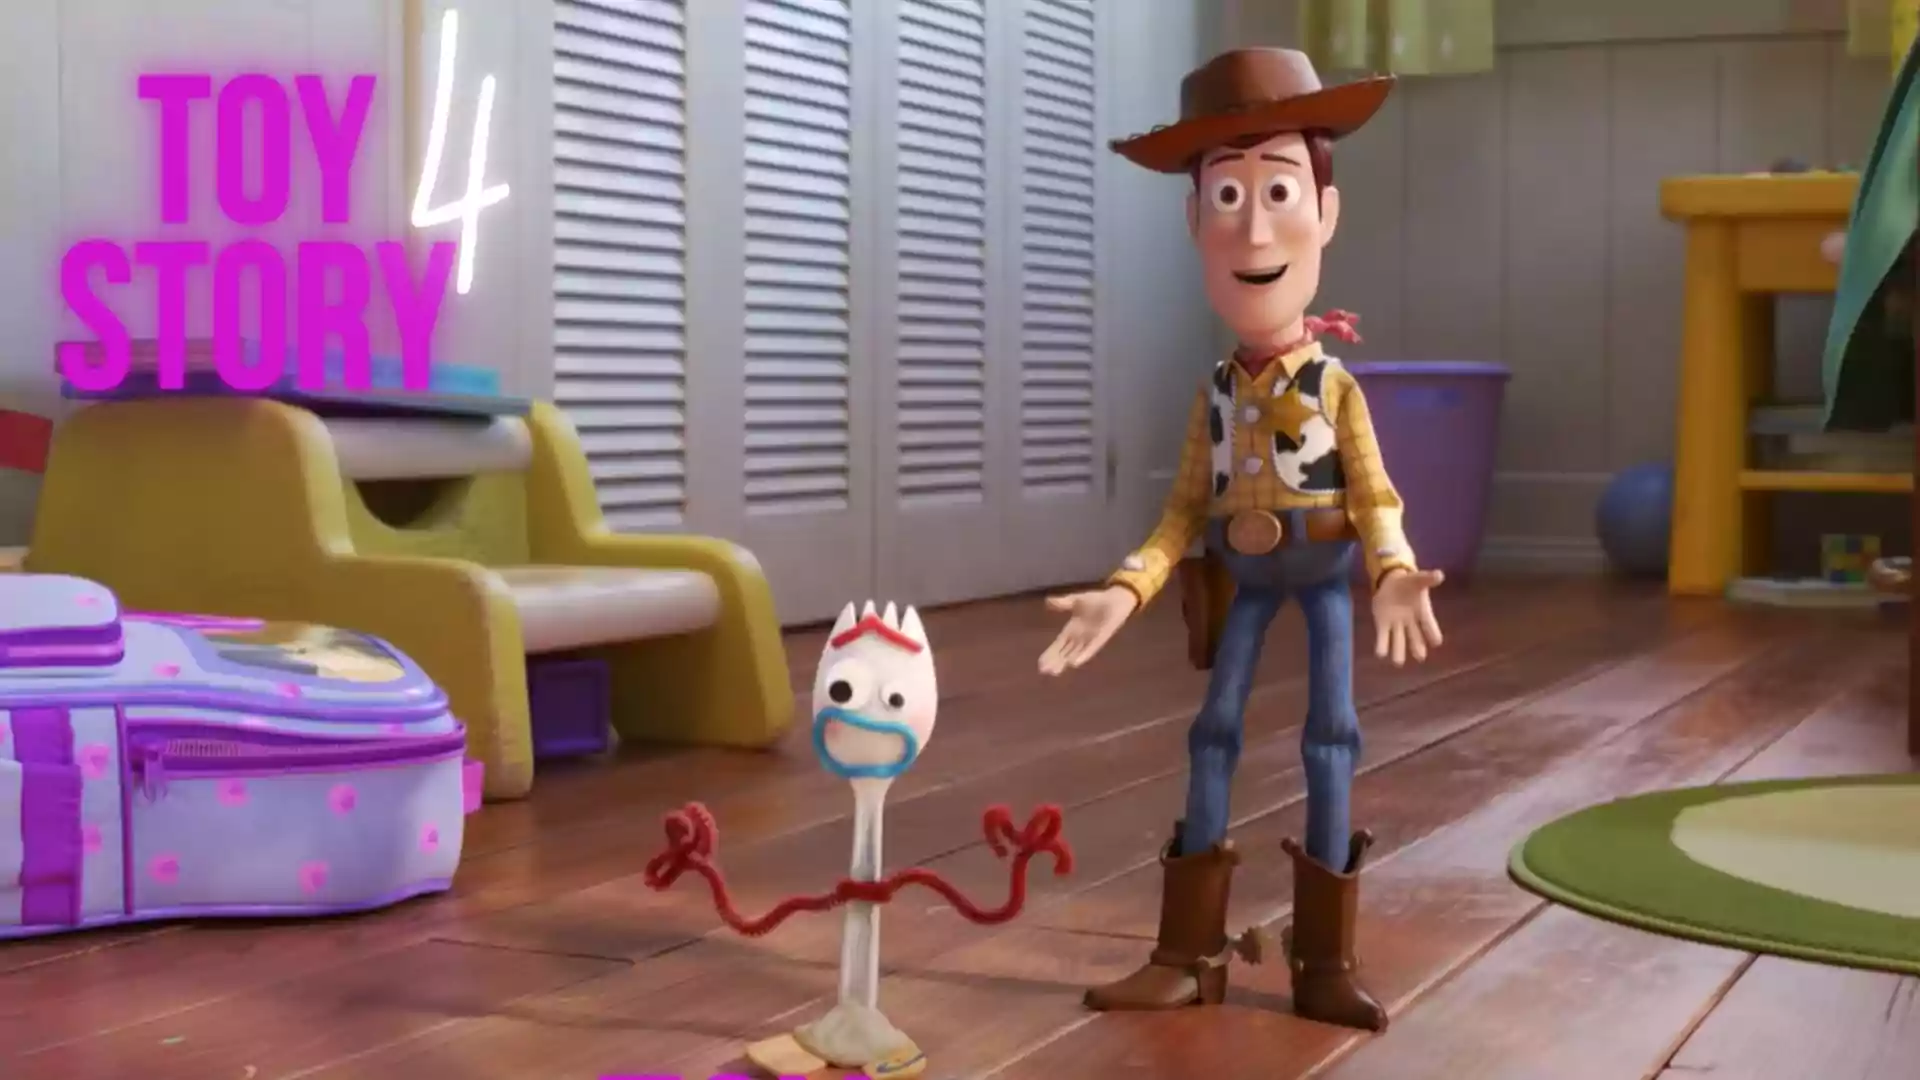 Toy Story 4 Parents guide and age rating